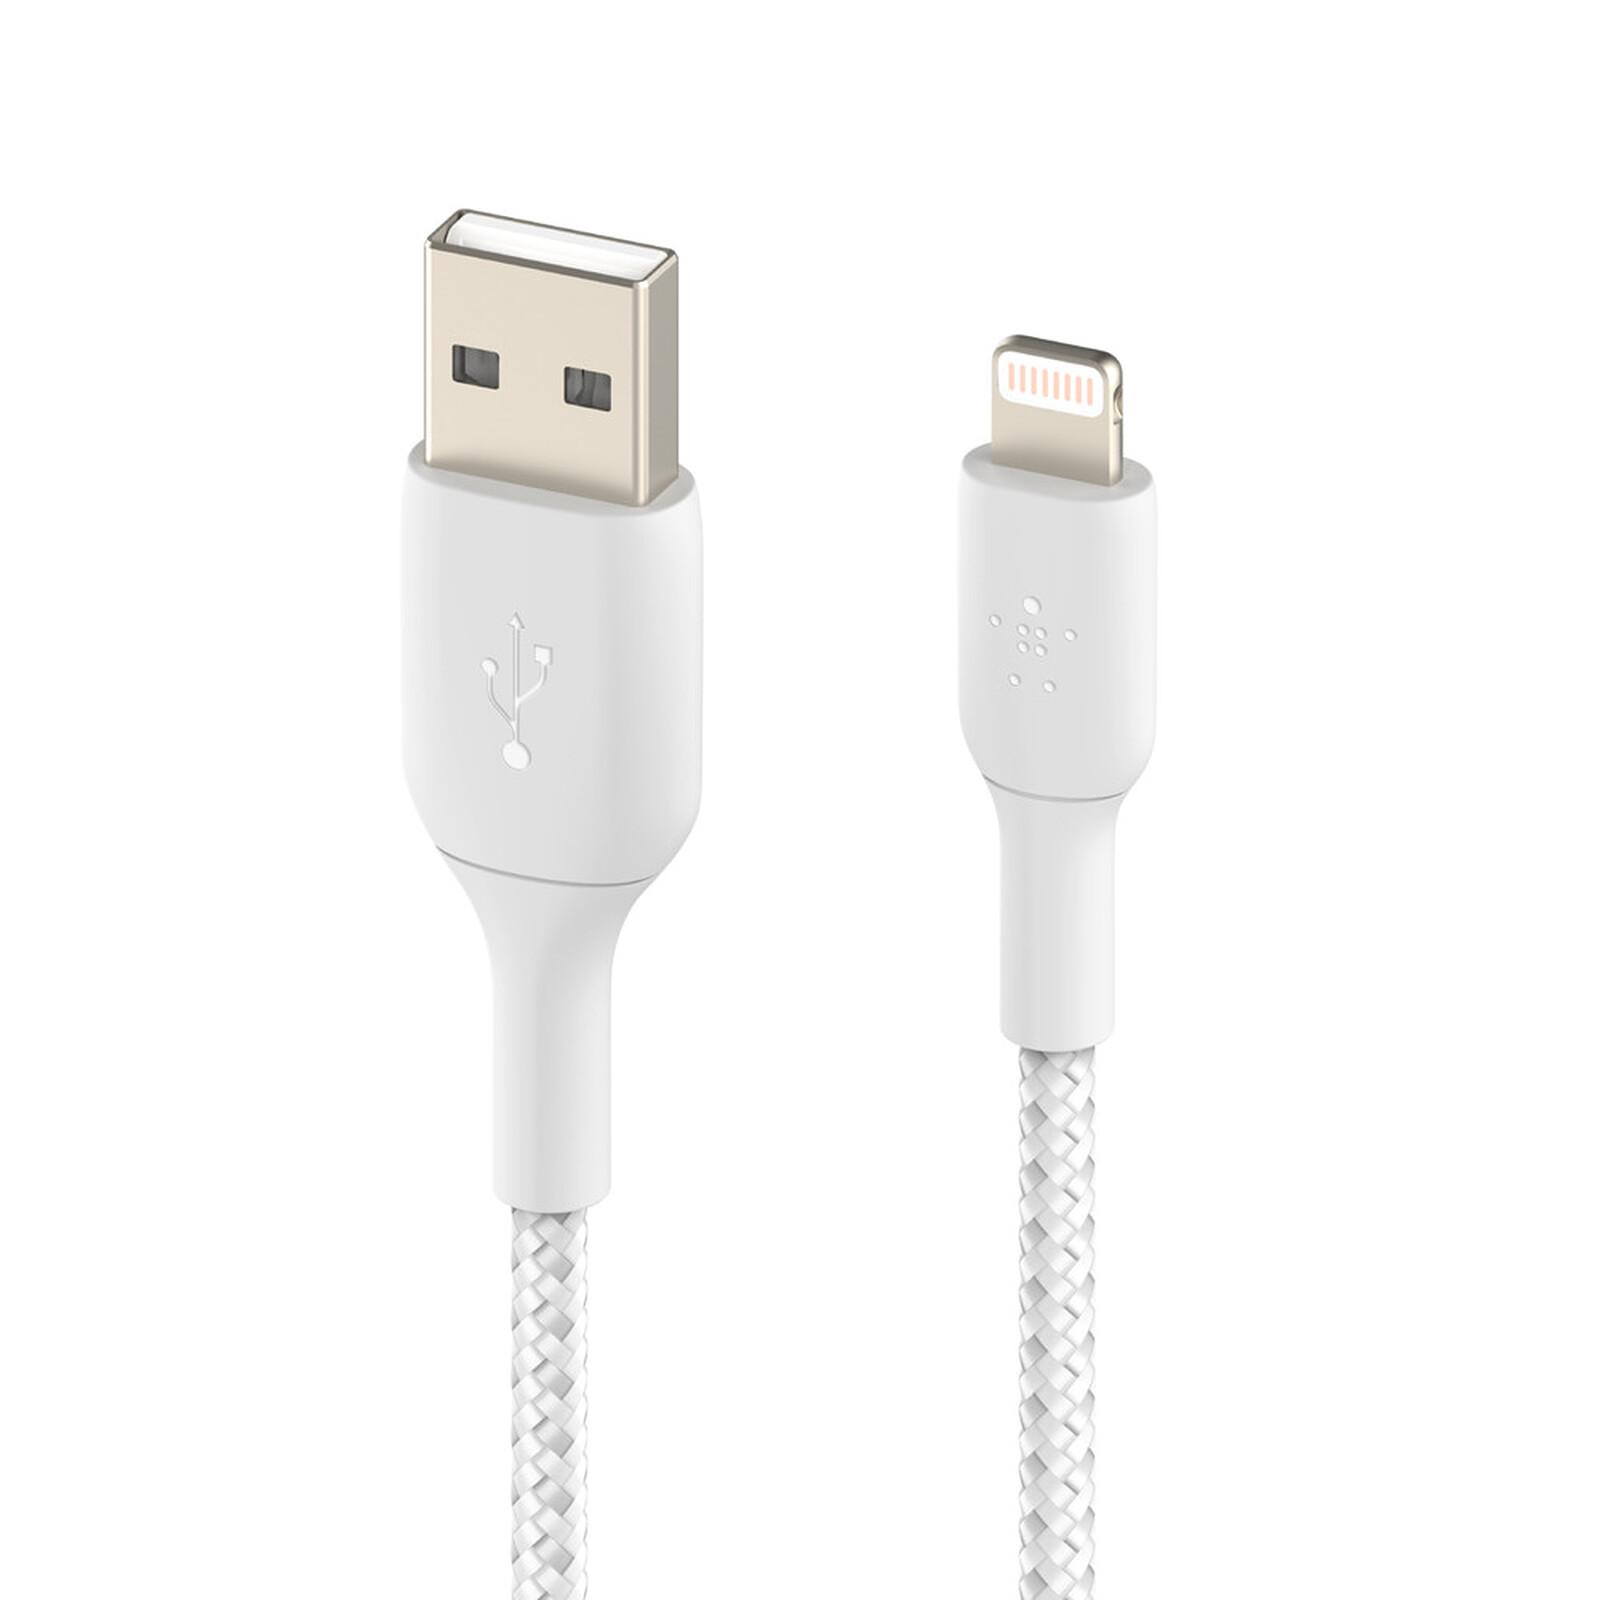 Belkin USB-A to Lightning MFI cable (white) - 2m - Apple accessories - LDLC  3-year warranty